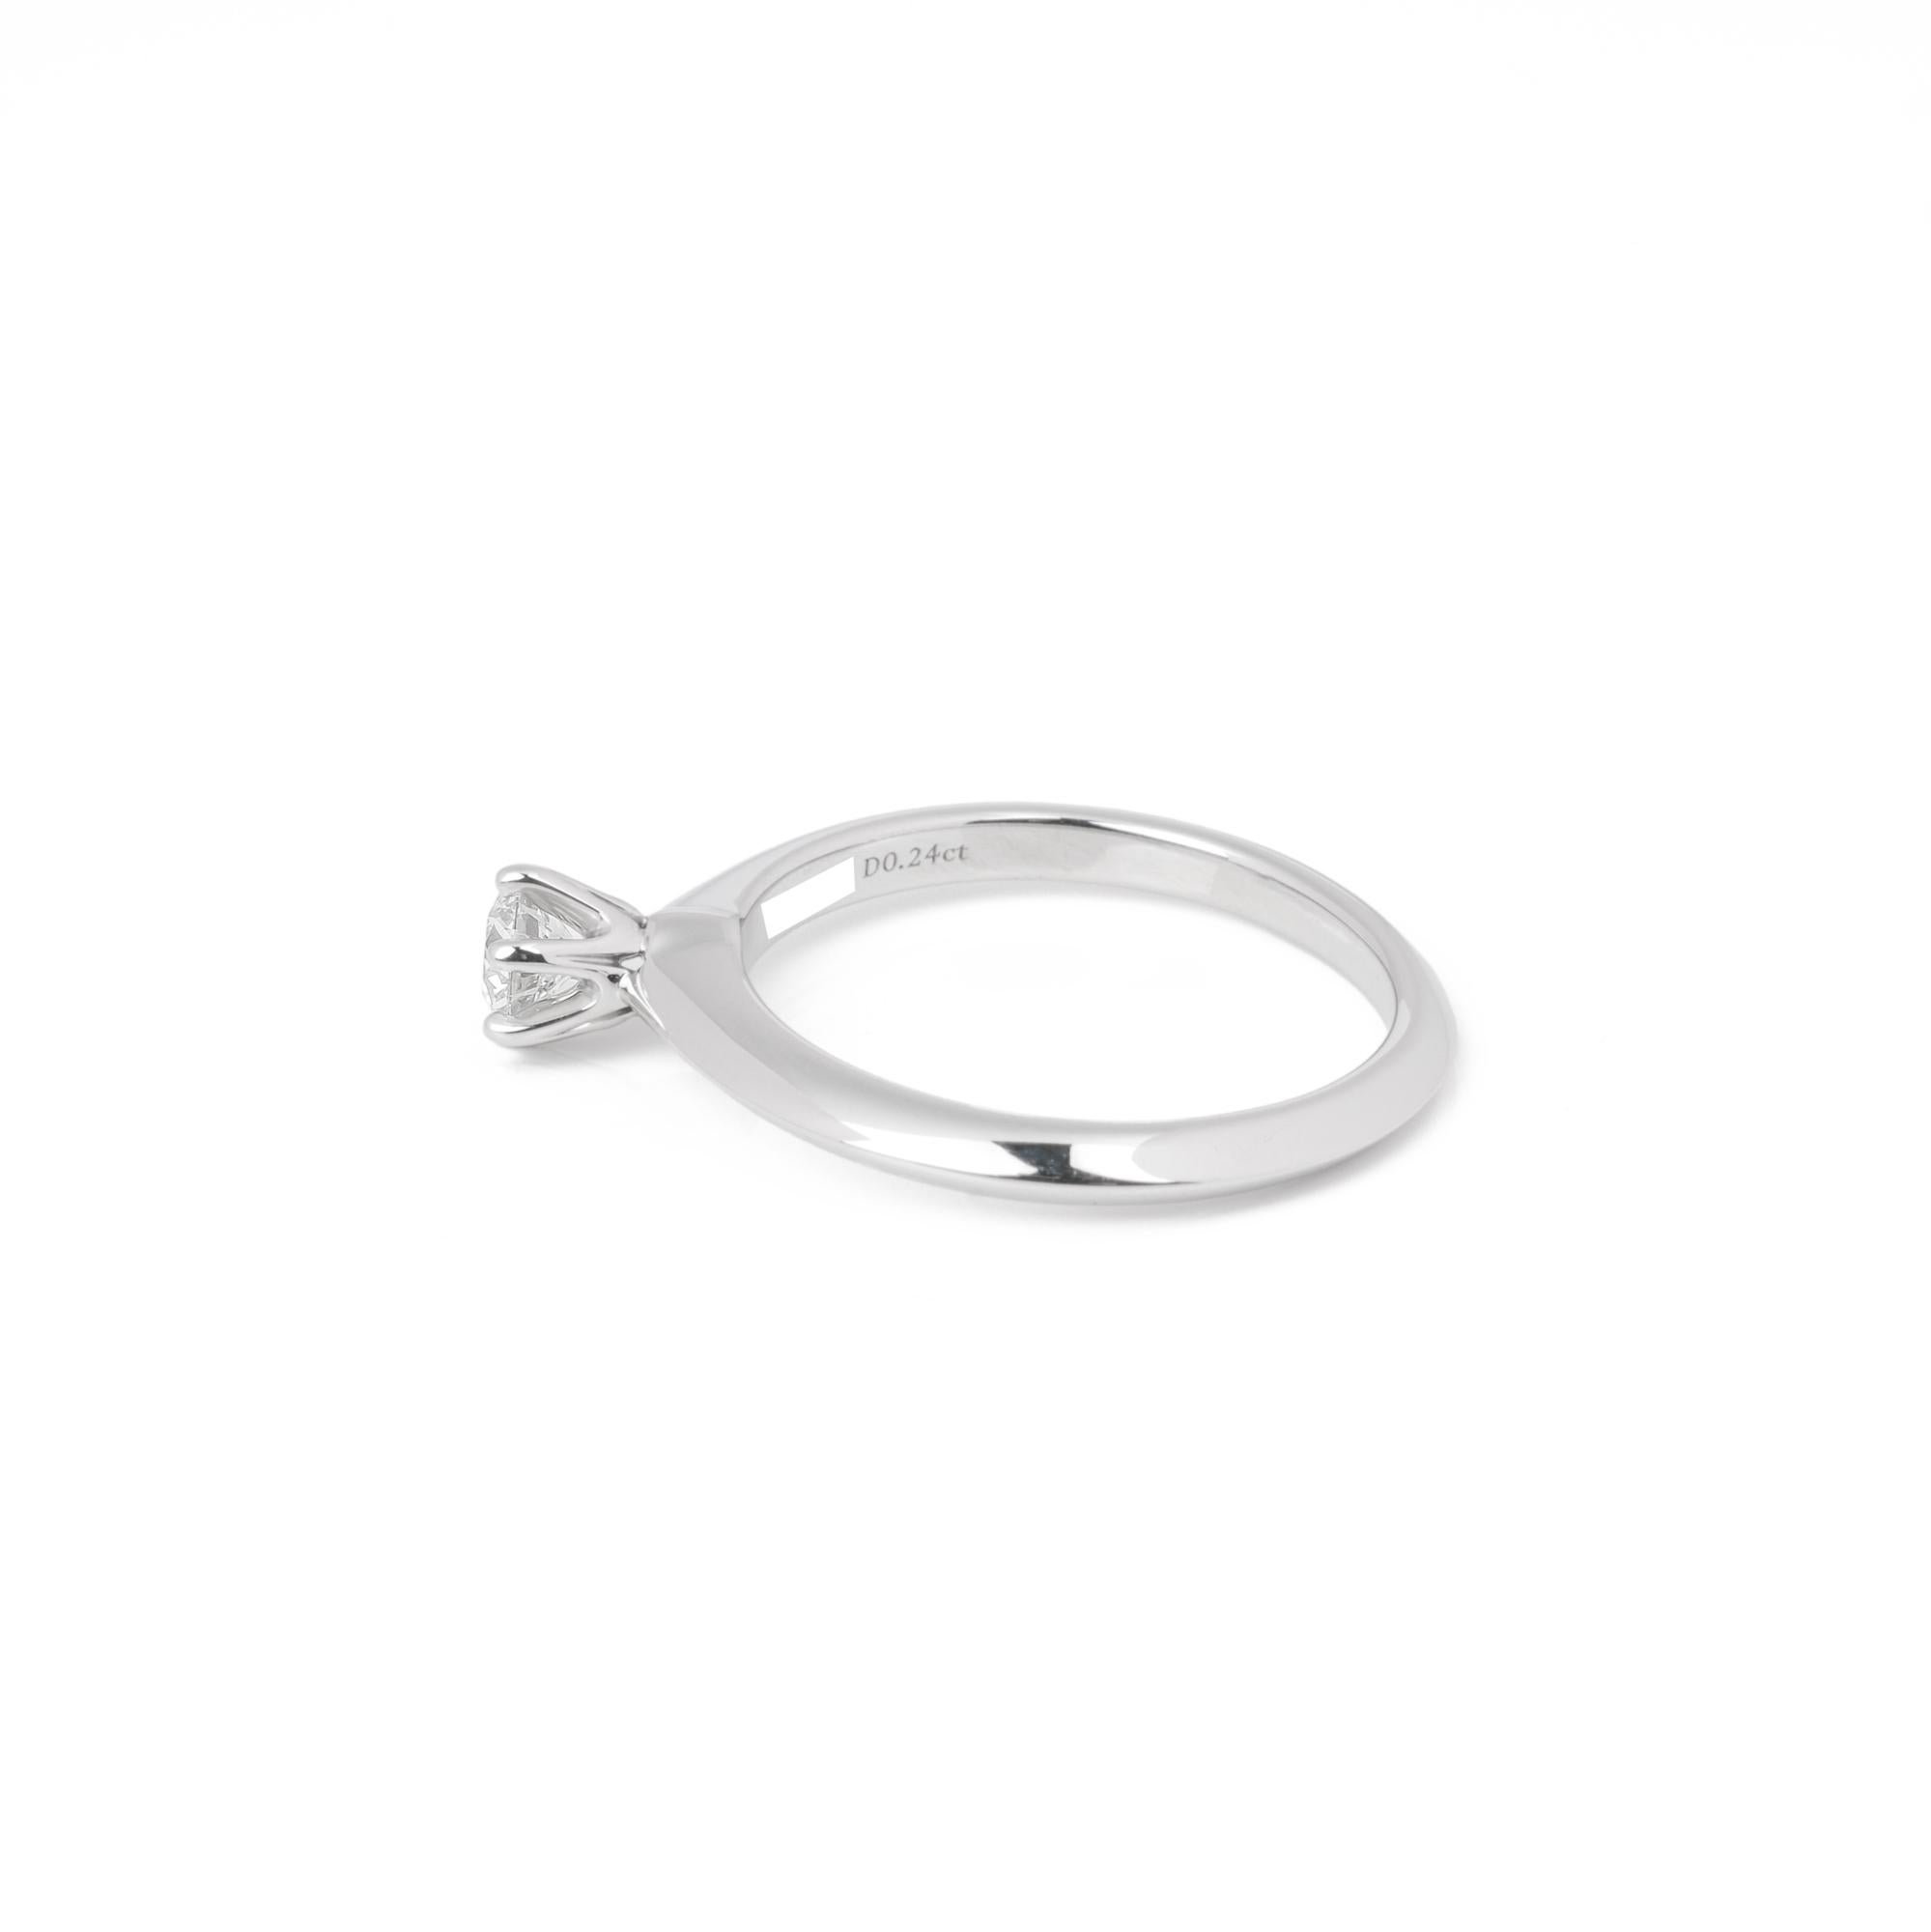 Contemporary Tiffany & Co Setting 0.24 Carat Diamond Solitaire Ring For Sale